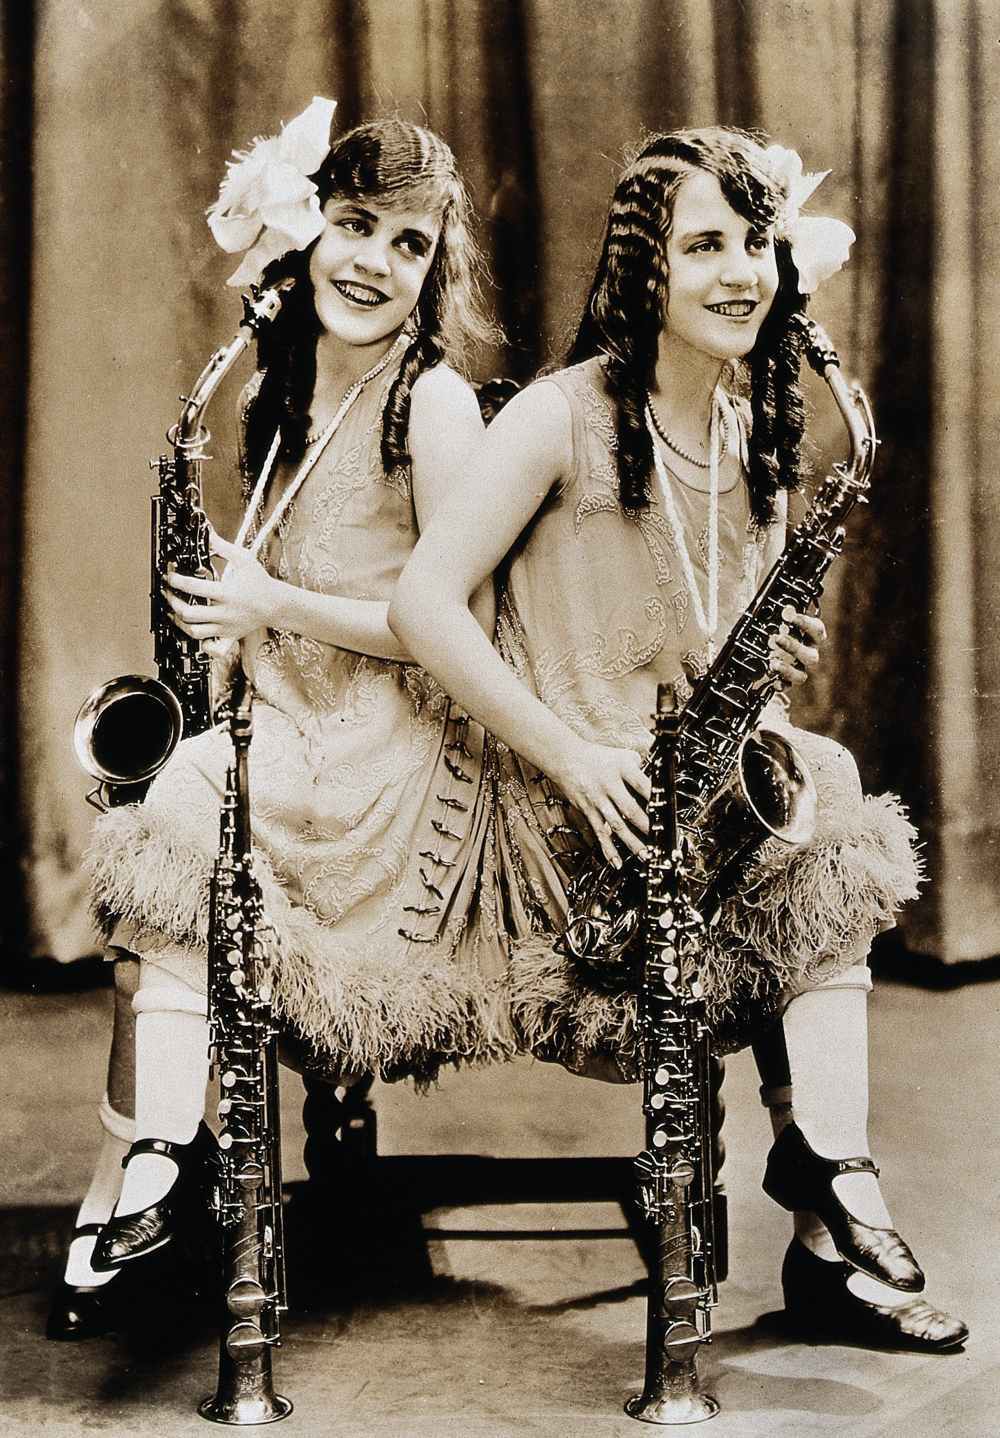 Daisy and Violet Hilton, conjoined twins, with saxophones